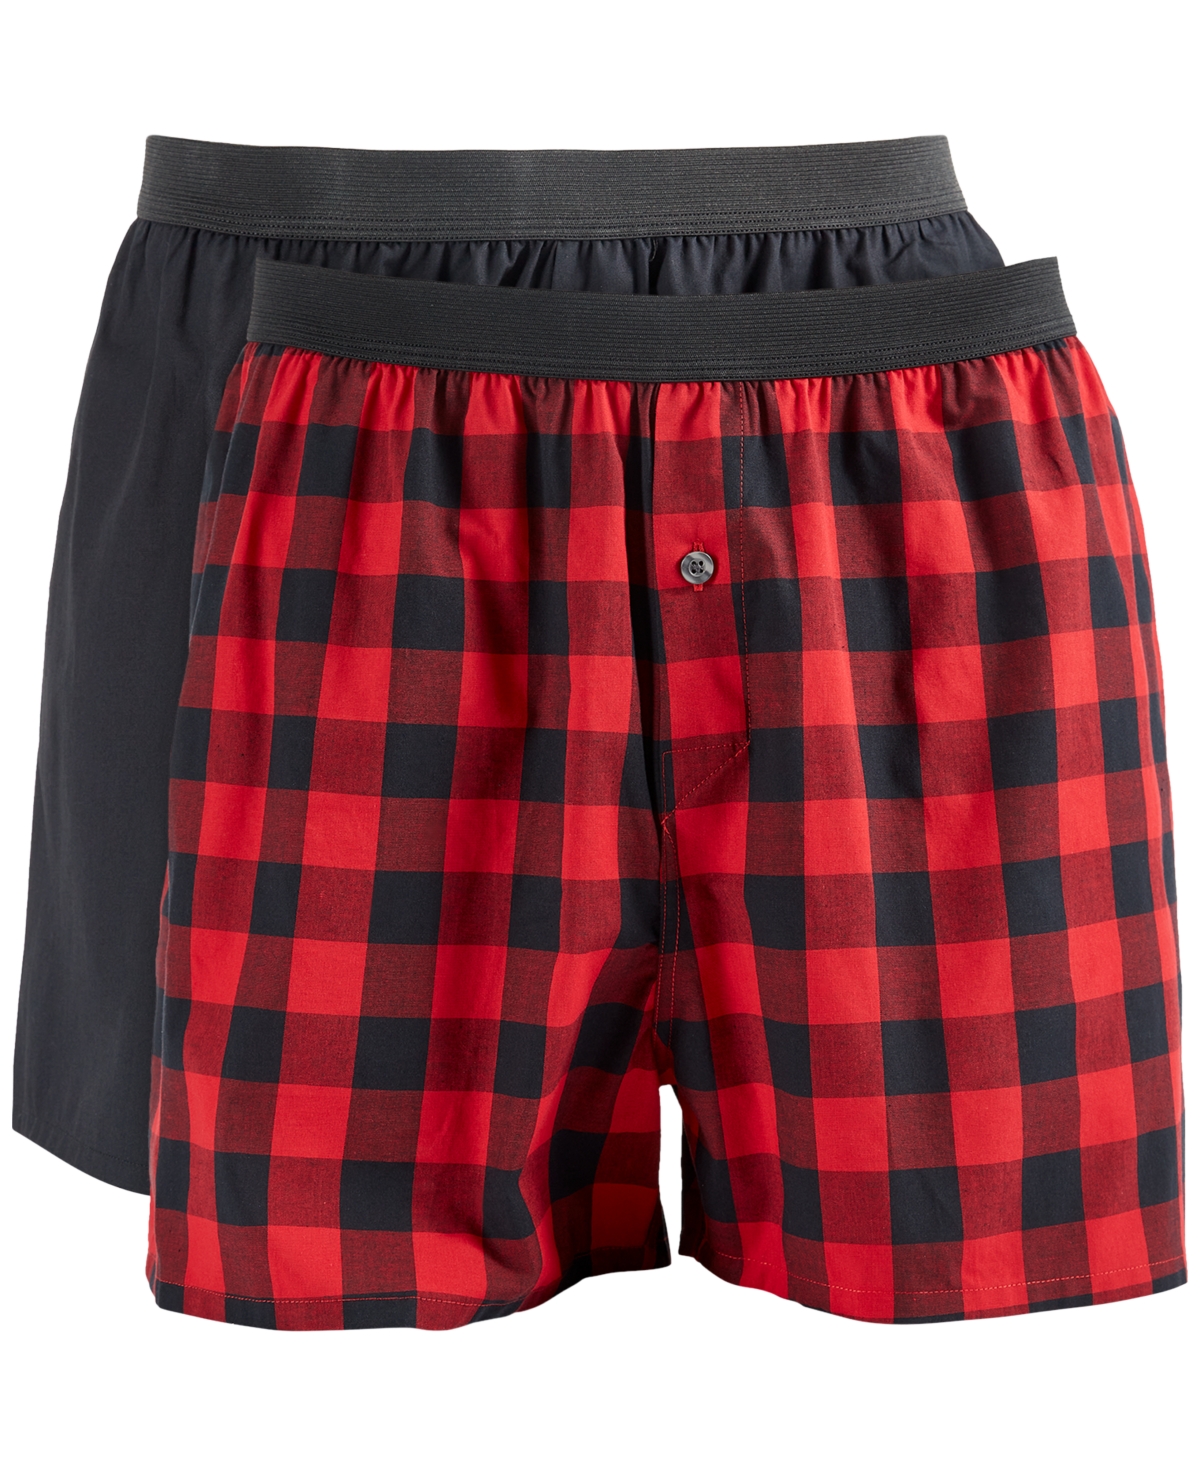 CLUB ROOM MEN'S 2-PK. BUFFALO CHECK & SOLID BOXER SHORTS, CREATED FOR MACY'S